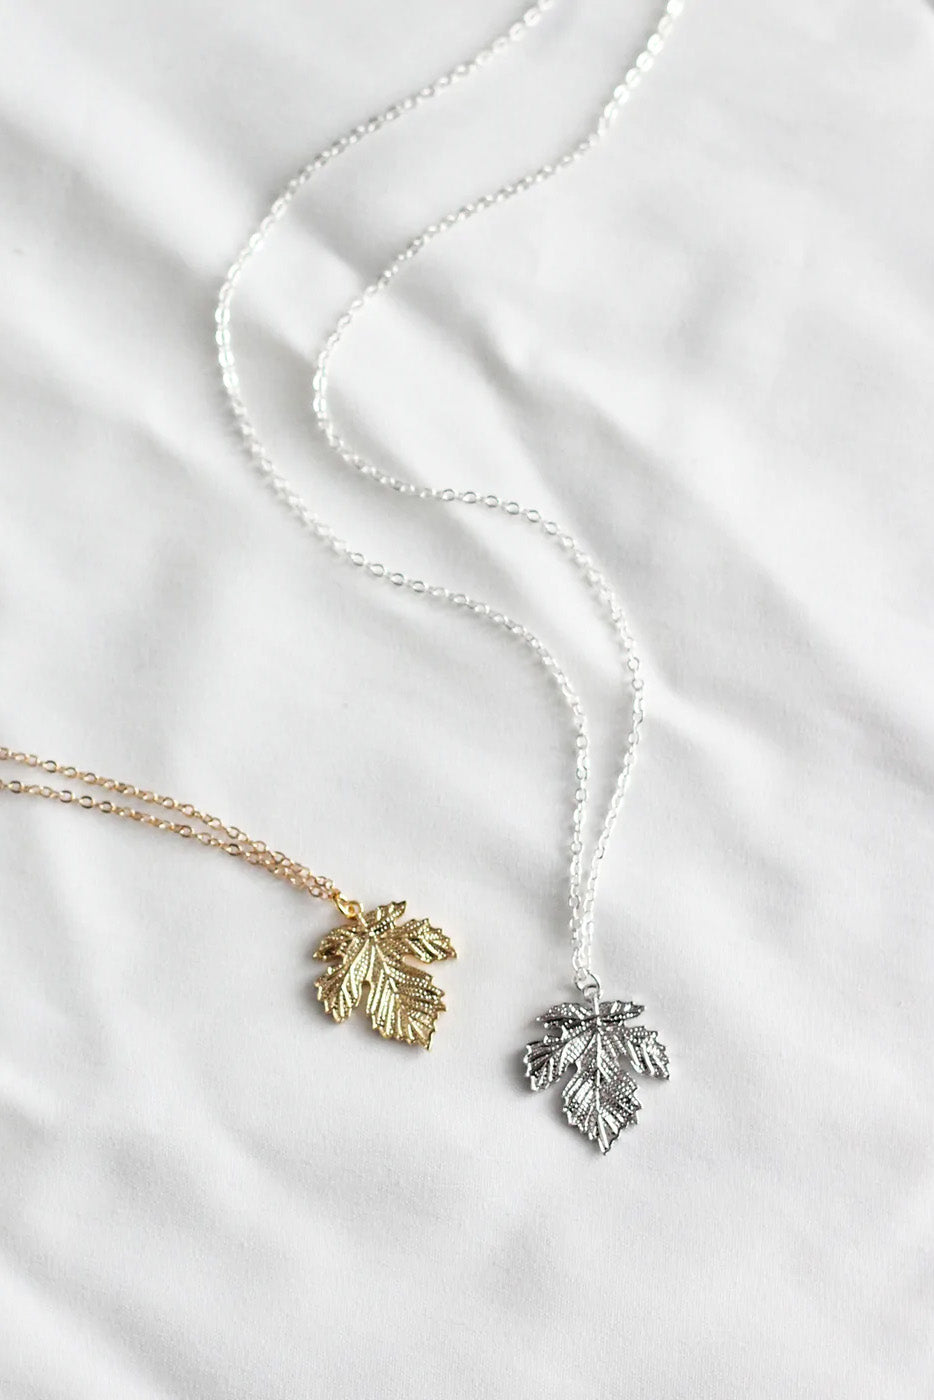 Heirloom Maple Leaf Necklace by Birch Jewellery, Gold, Silver, made in Ottawa